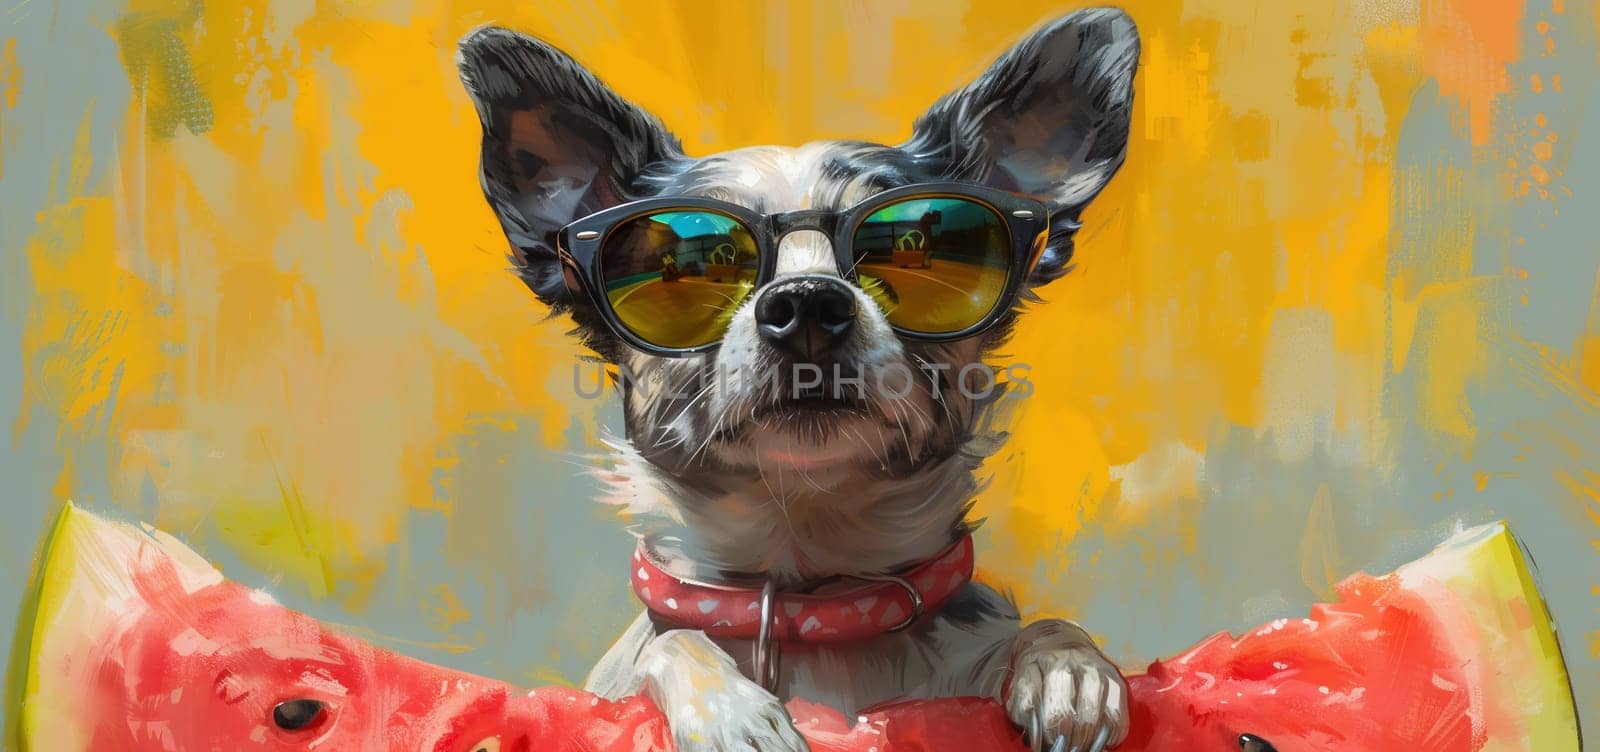 Smiling puppy wearing sunglasses holds a watermelon by Andelov13